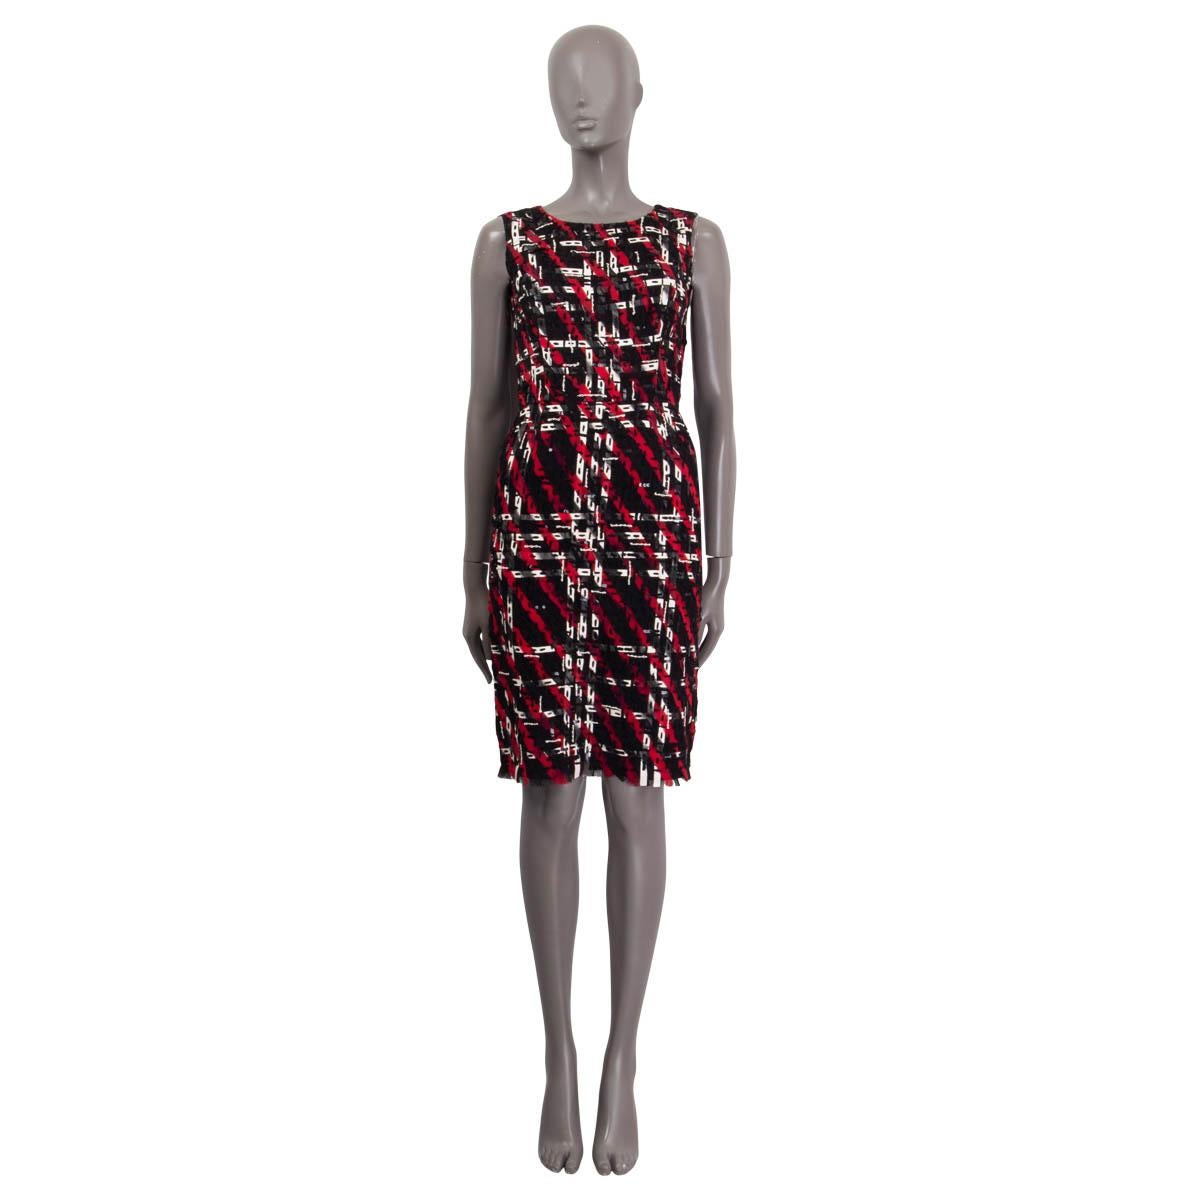 100% authentic Oscar de la Renta sleeveless cocktail dress in black, red and white silk (100%). Features sequin and white leather embellishments. Opens with a concealed zipper and two hooks on the back. Lined in black silk (100%). Has been worn and